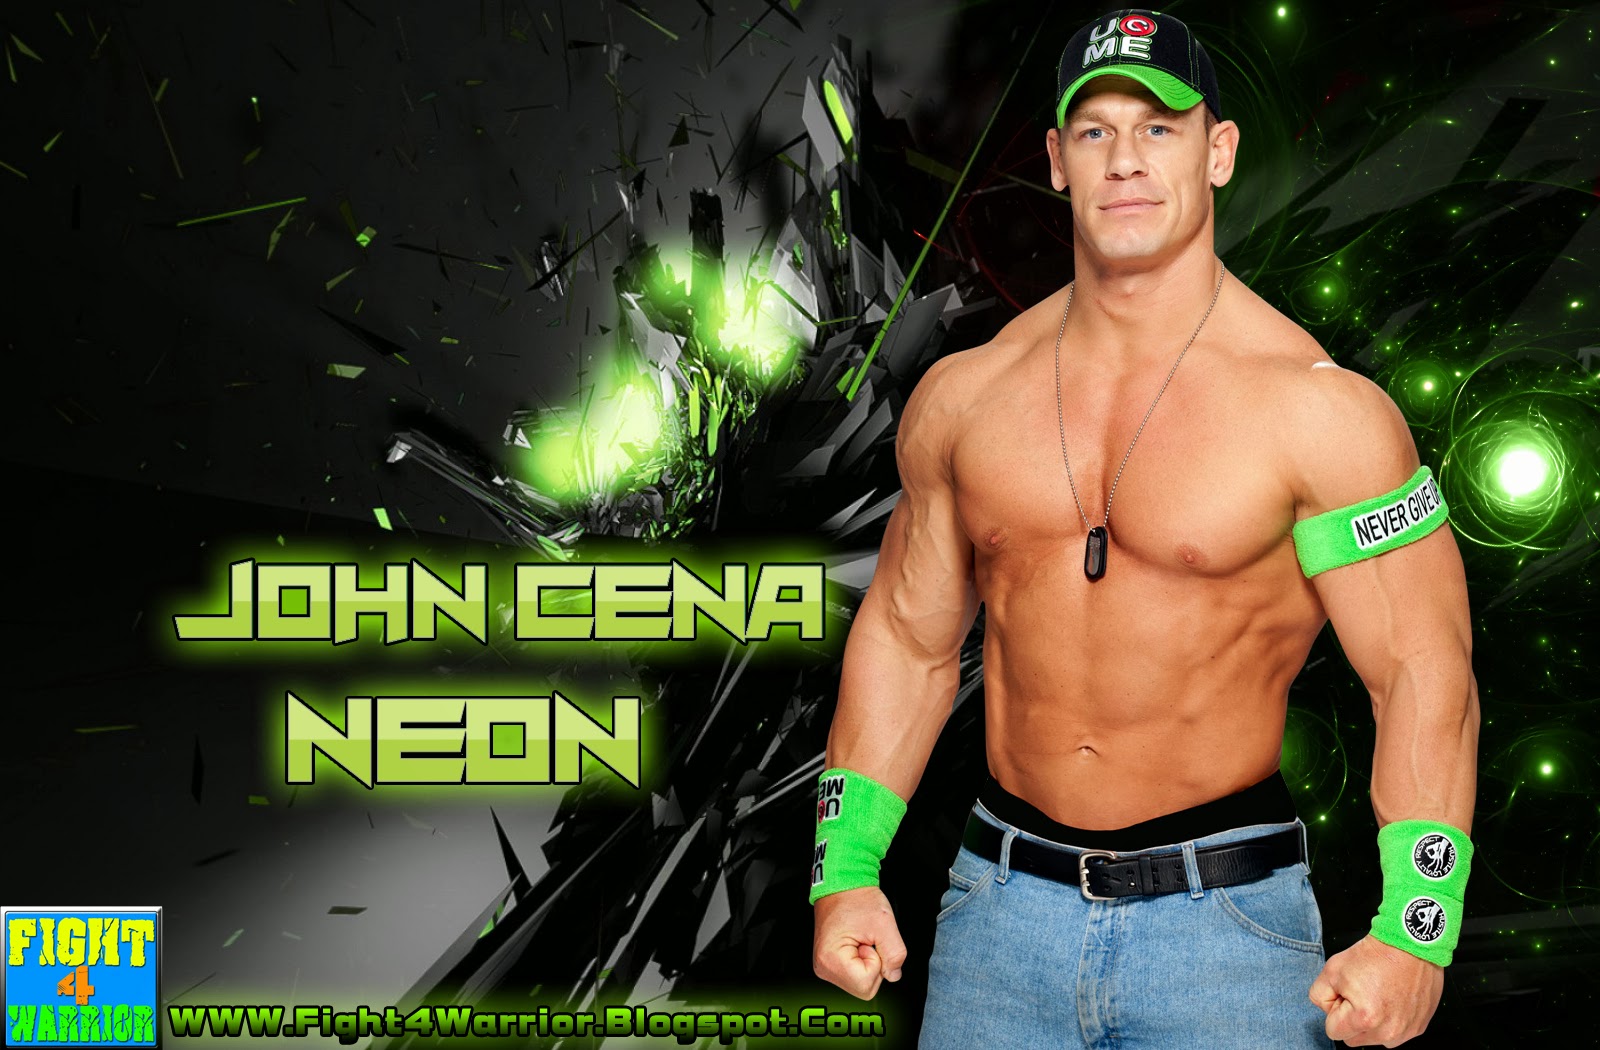 john cena iphone wallpaper,barechested,muscle,chest,professional wrestling,pc game